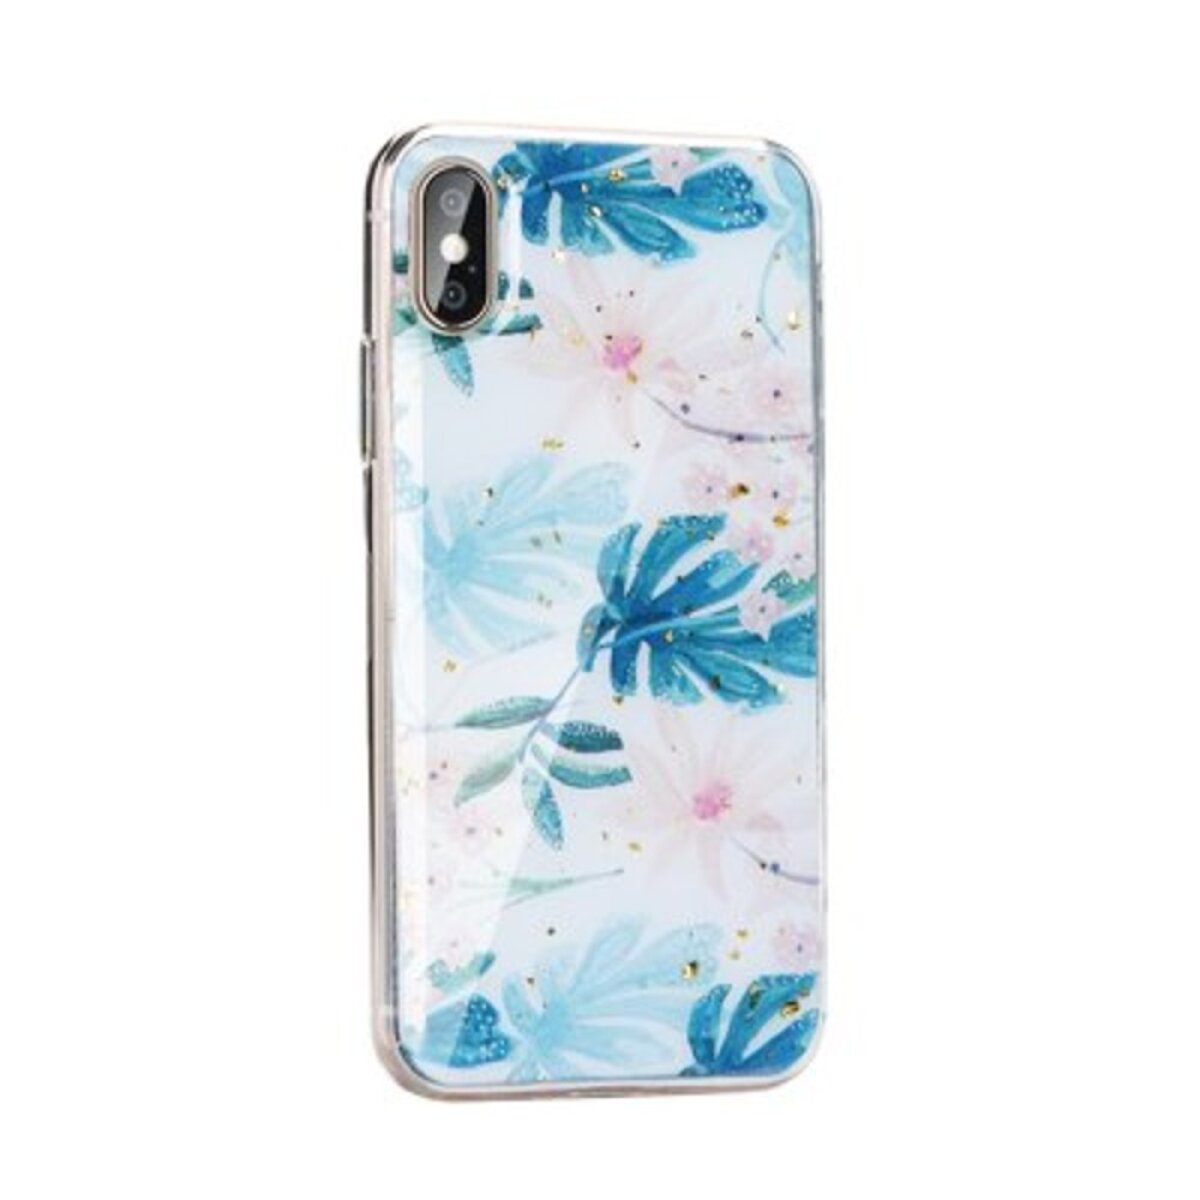 Bookcover, 11 2, Not iPhone MARBLE available iPhone design FORCELL 11, Case Apple,